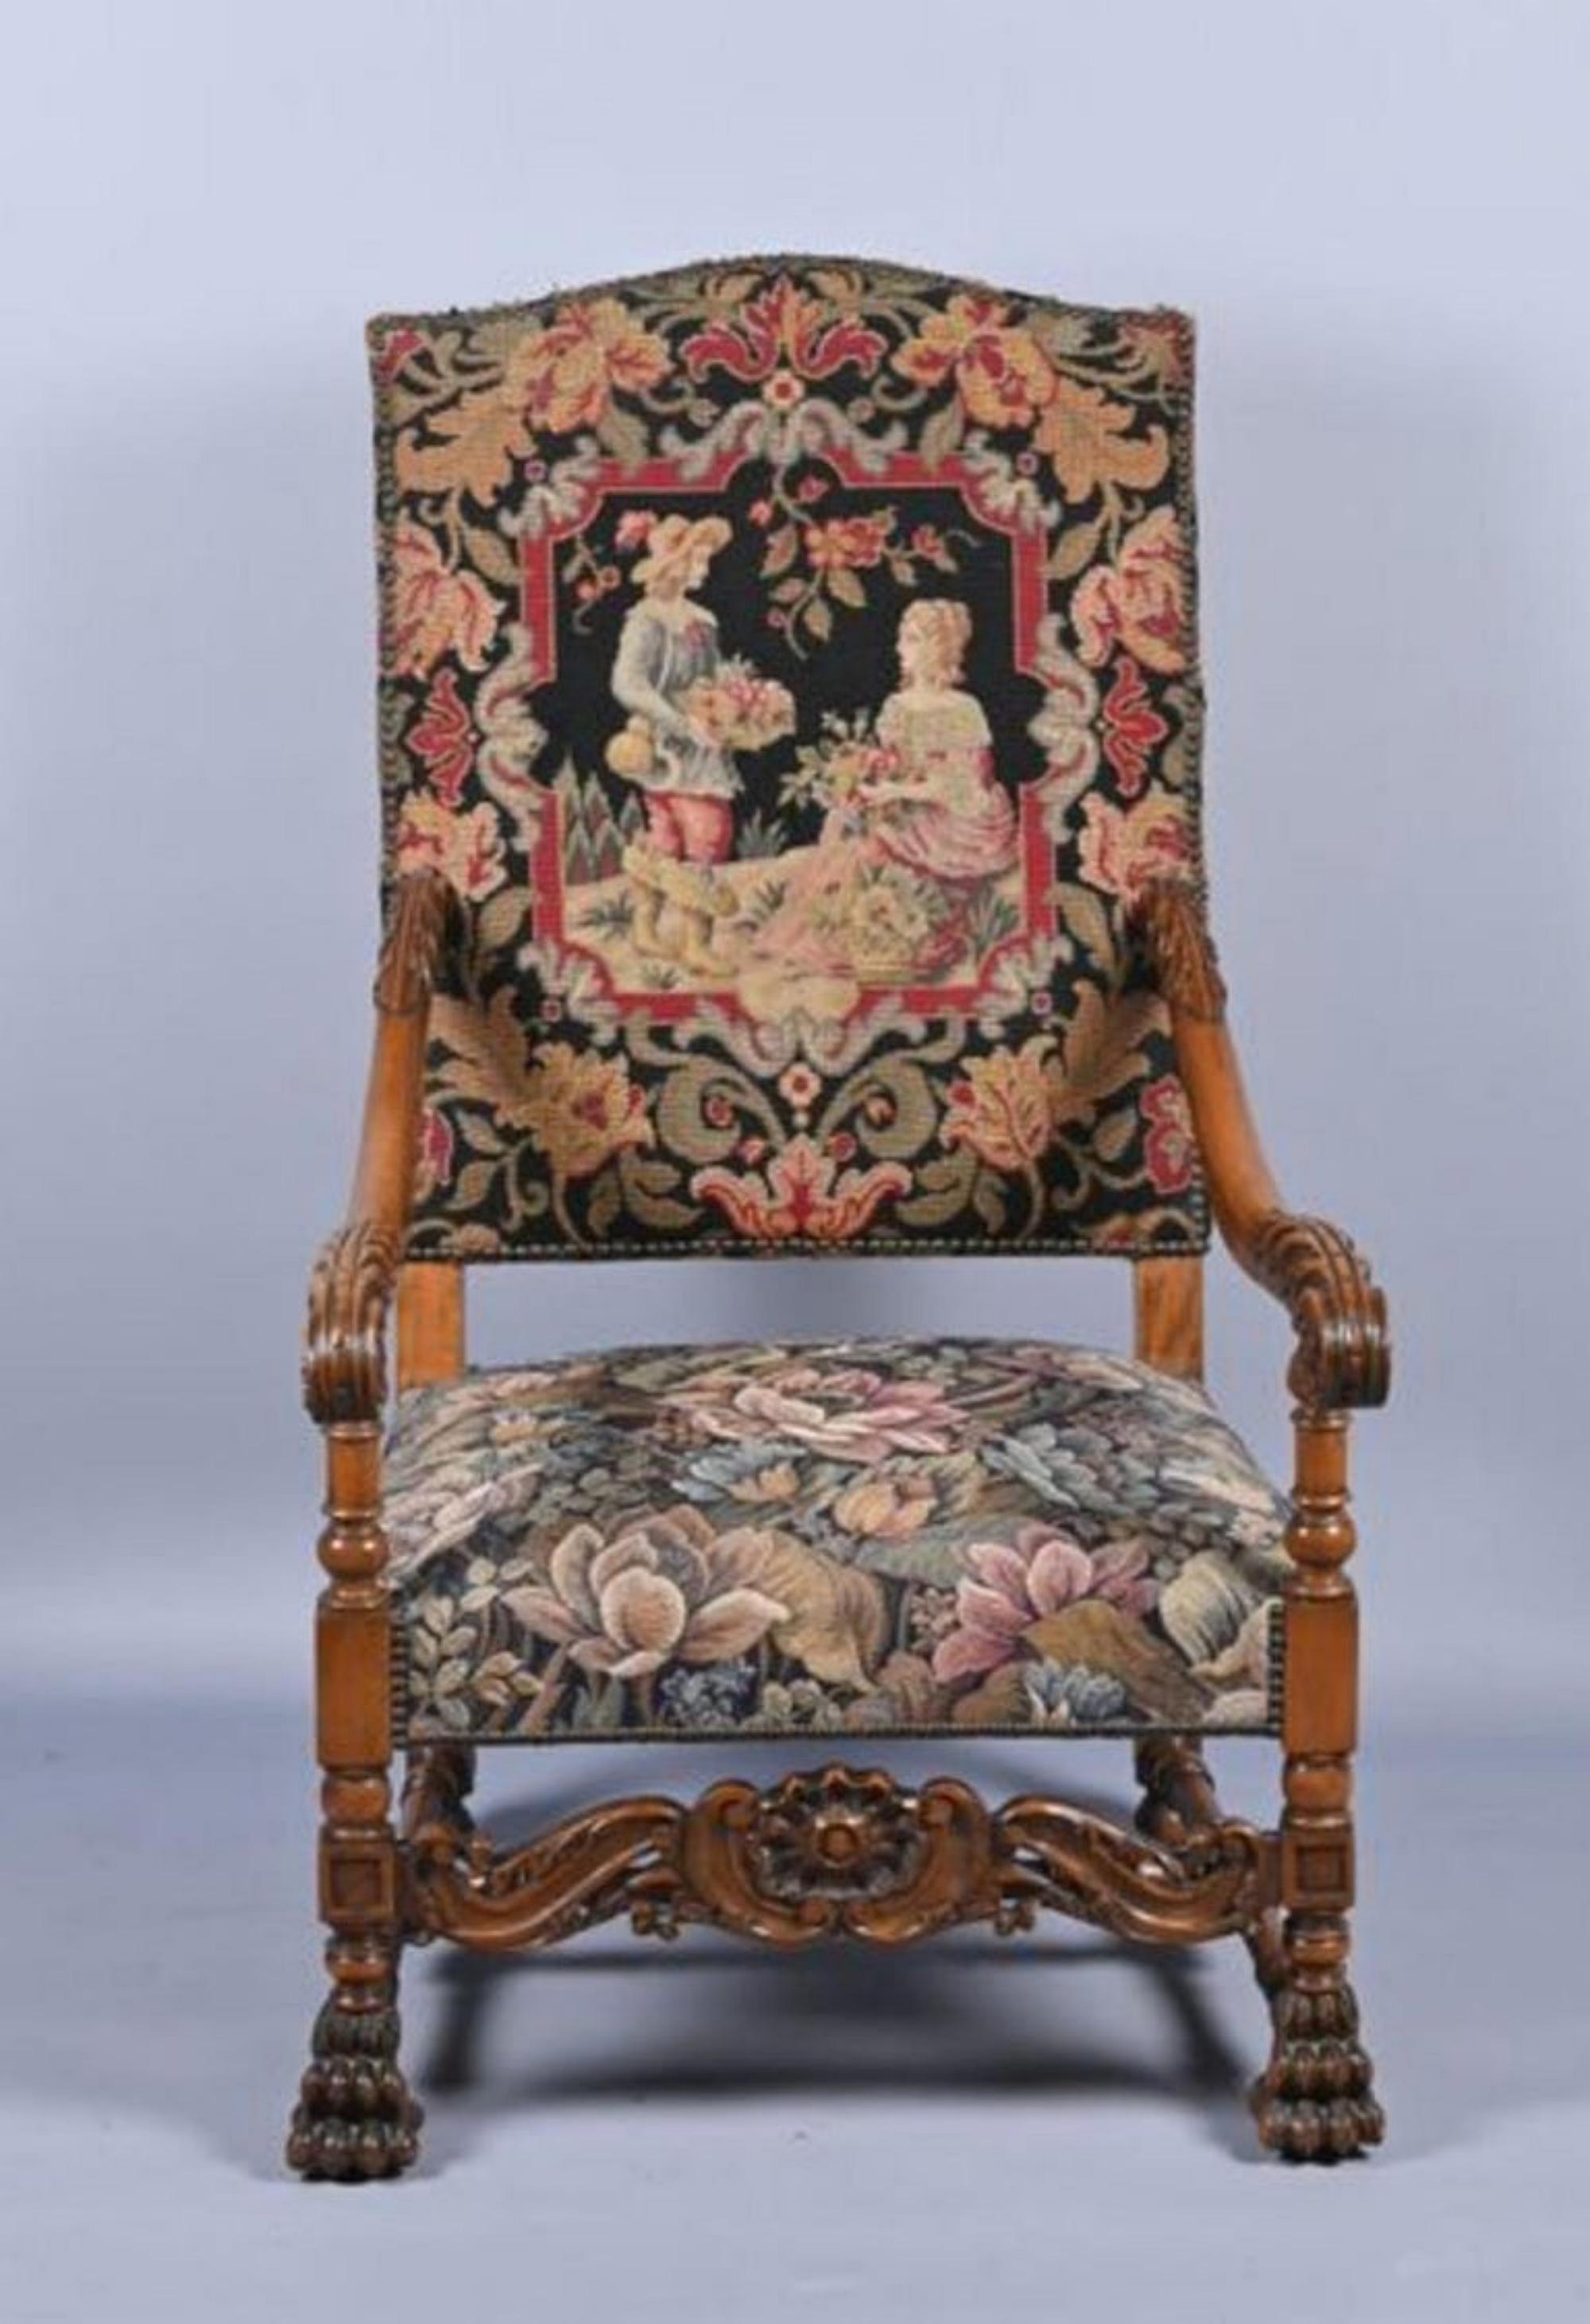 Hand-Crafted Rare Portuguese Chair 18th Century Rosewood with VIDEO For Sale